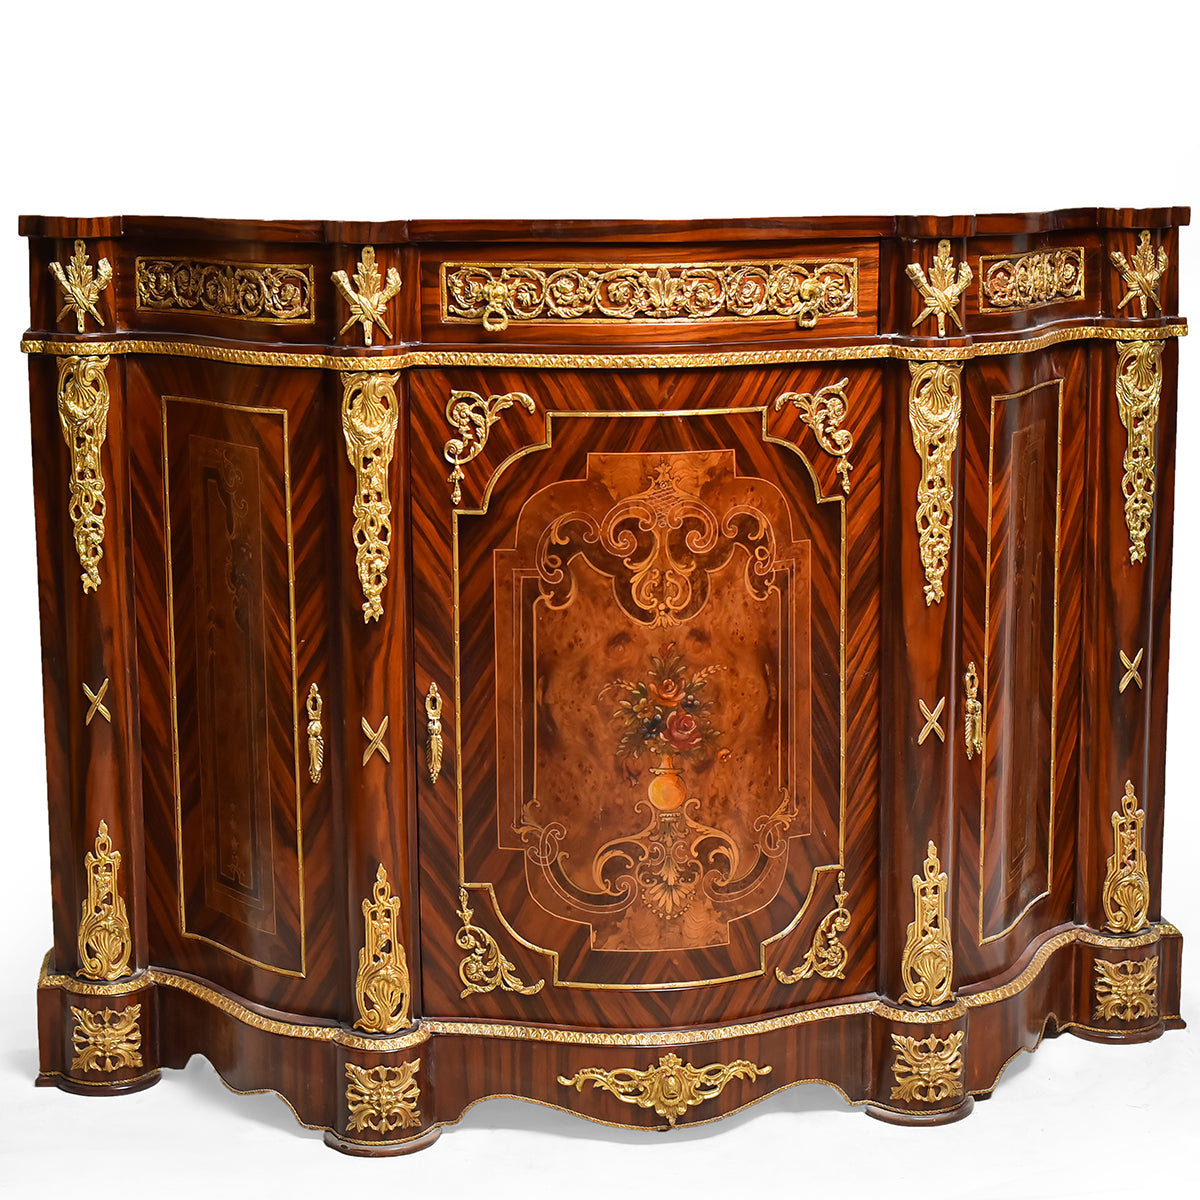 Late 1700s French gilt mounted cabinet